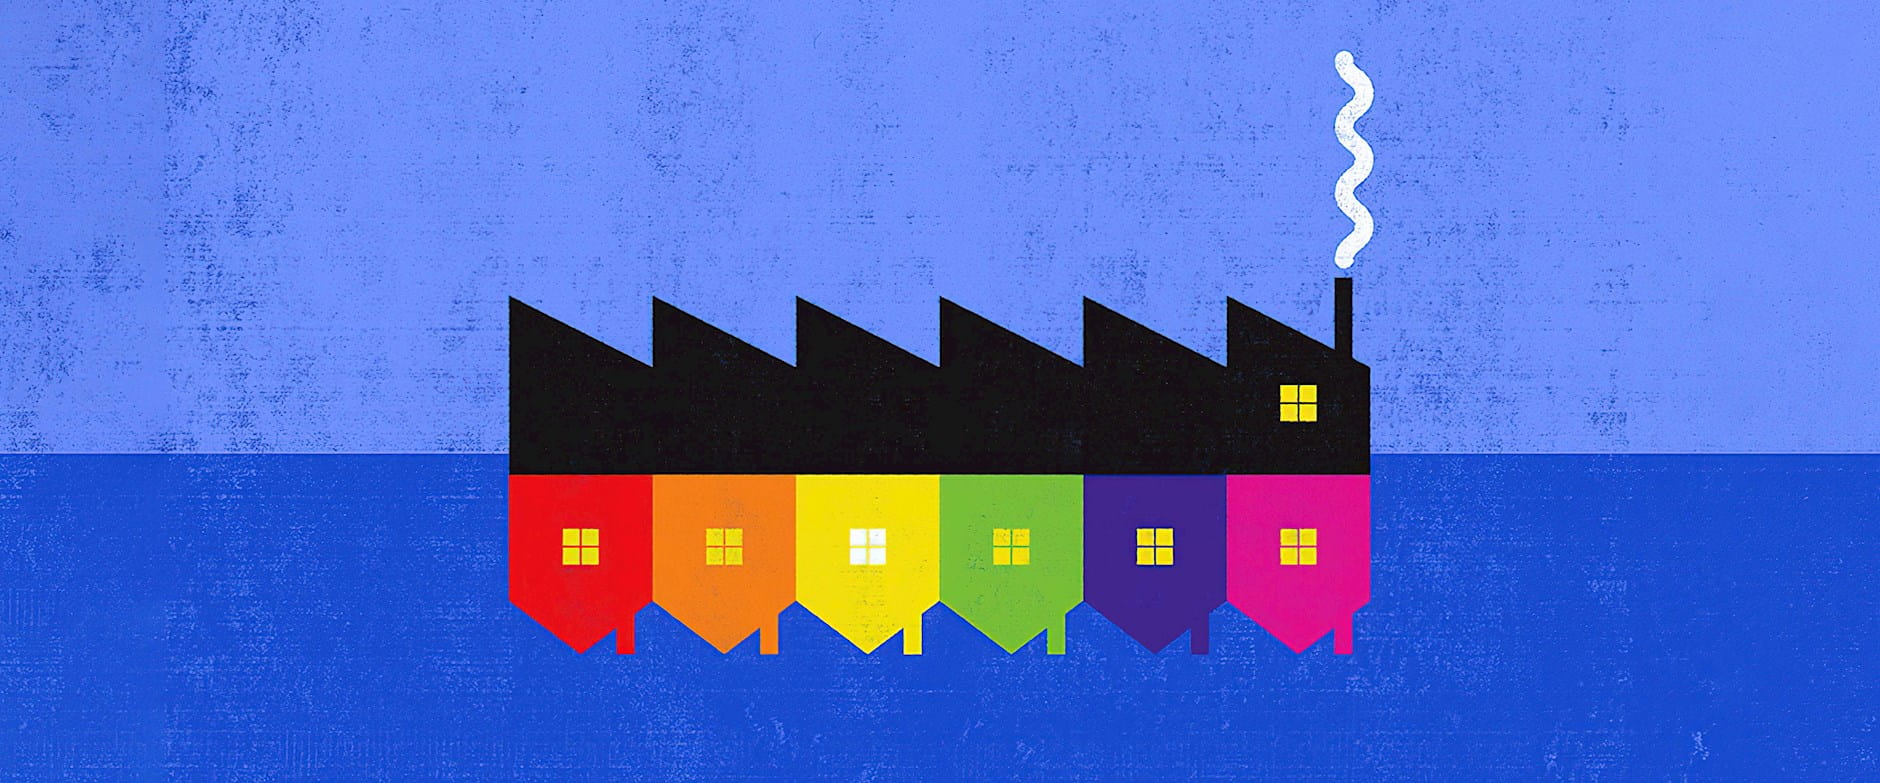 An inverted row of colorful houses make up the jagged shape of a dark factory above